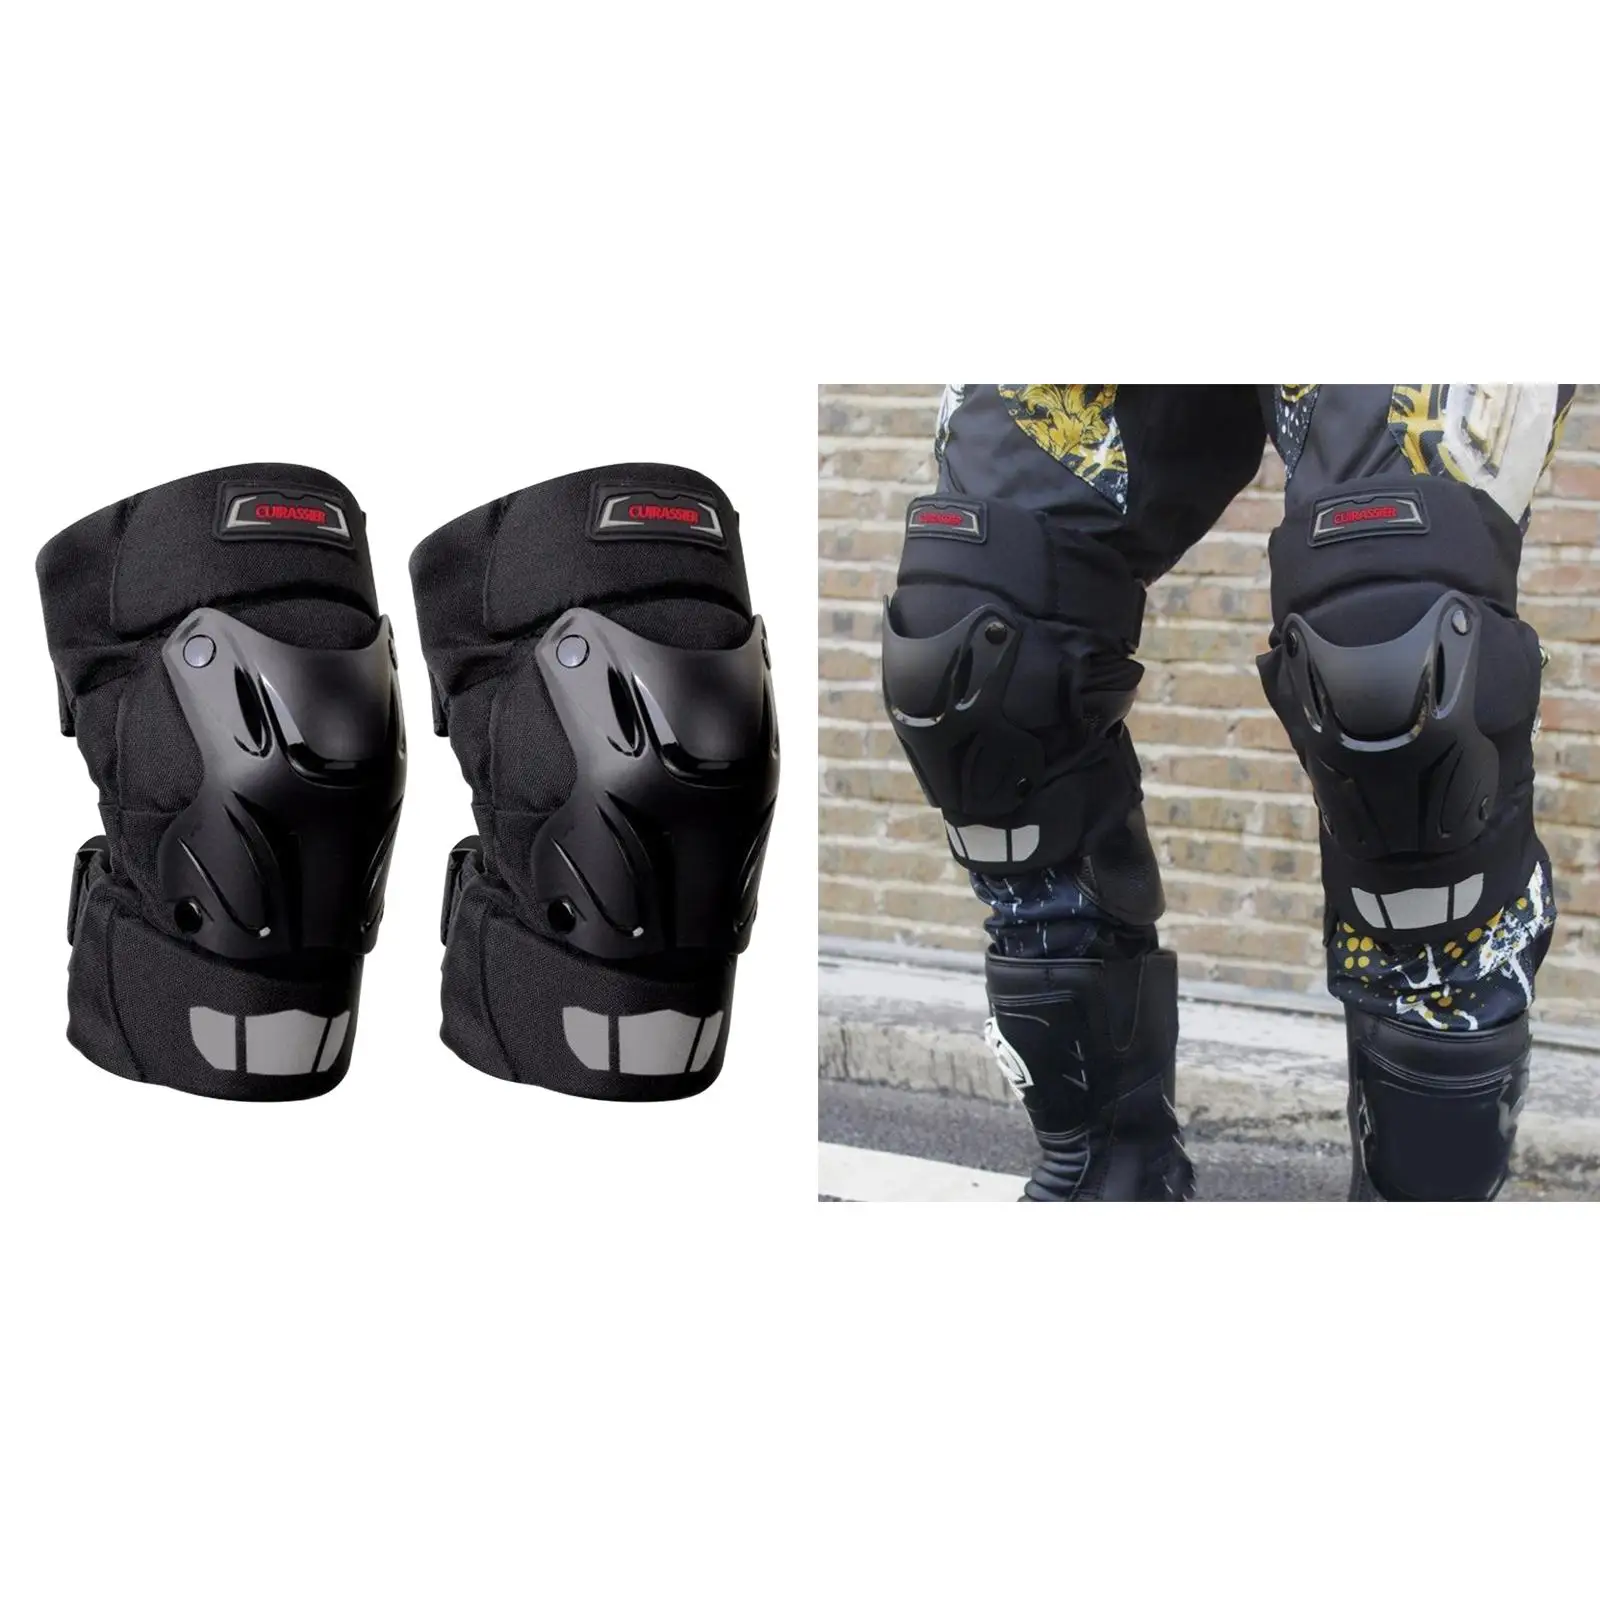 1 Pair Racing Motorcycle Knee Protection Pad Gear Guard Shock Proof Safety Off Road